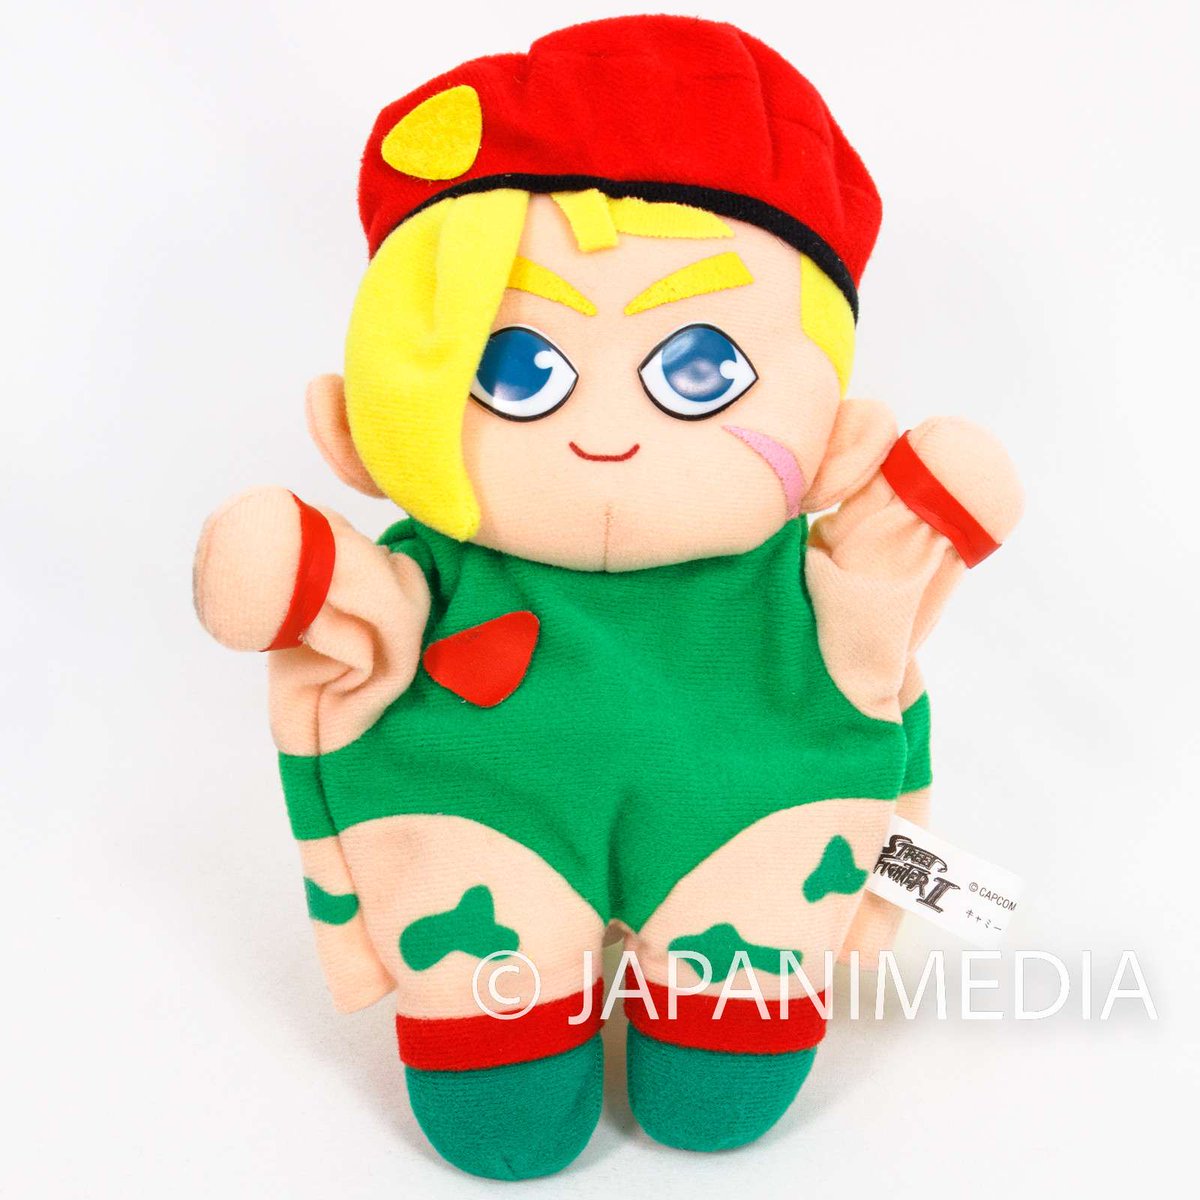 I used to have this cammy plush that I used to pour milk on and suck the milk out of it 😭 I used to slam it against walls and it would make a loud thud